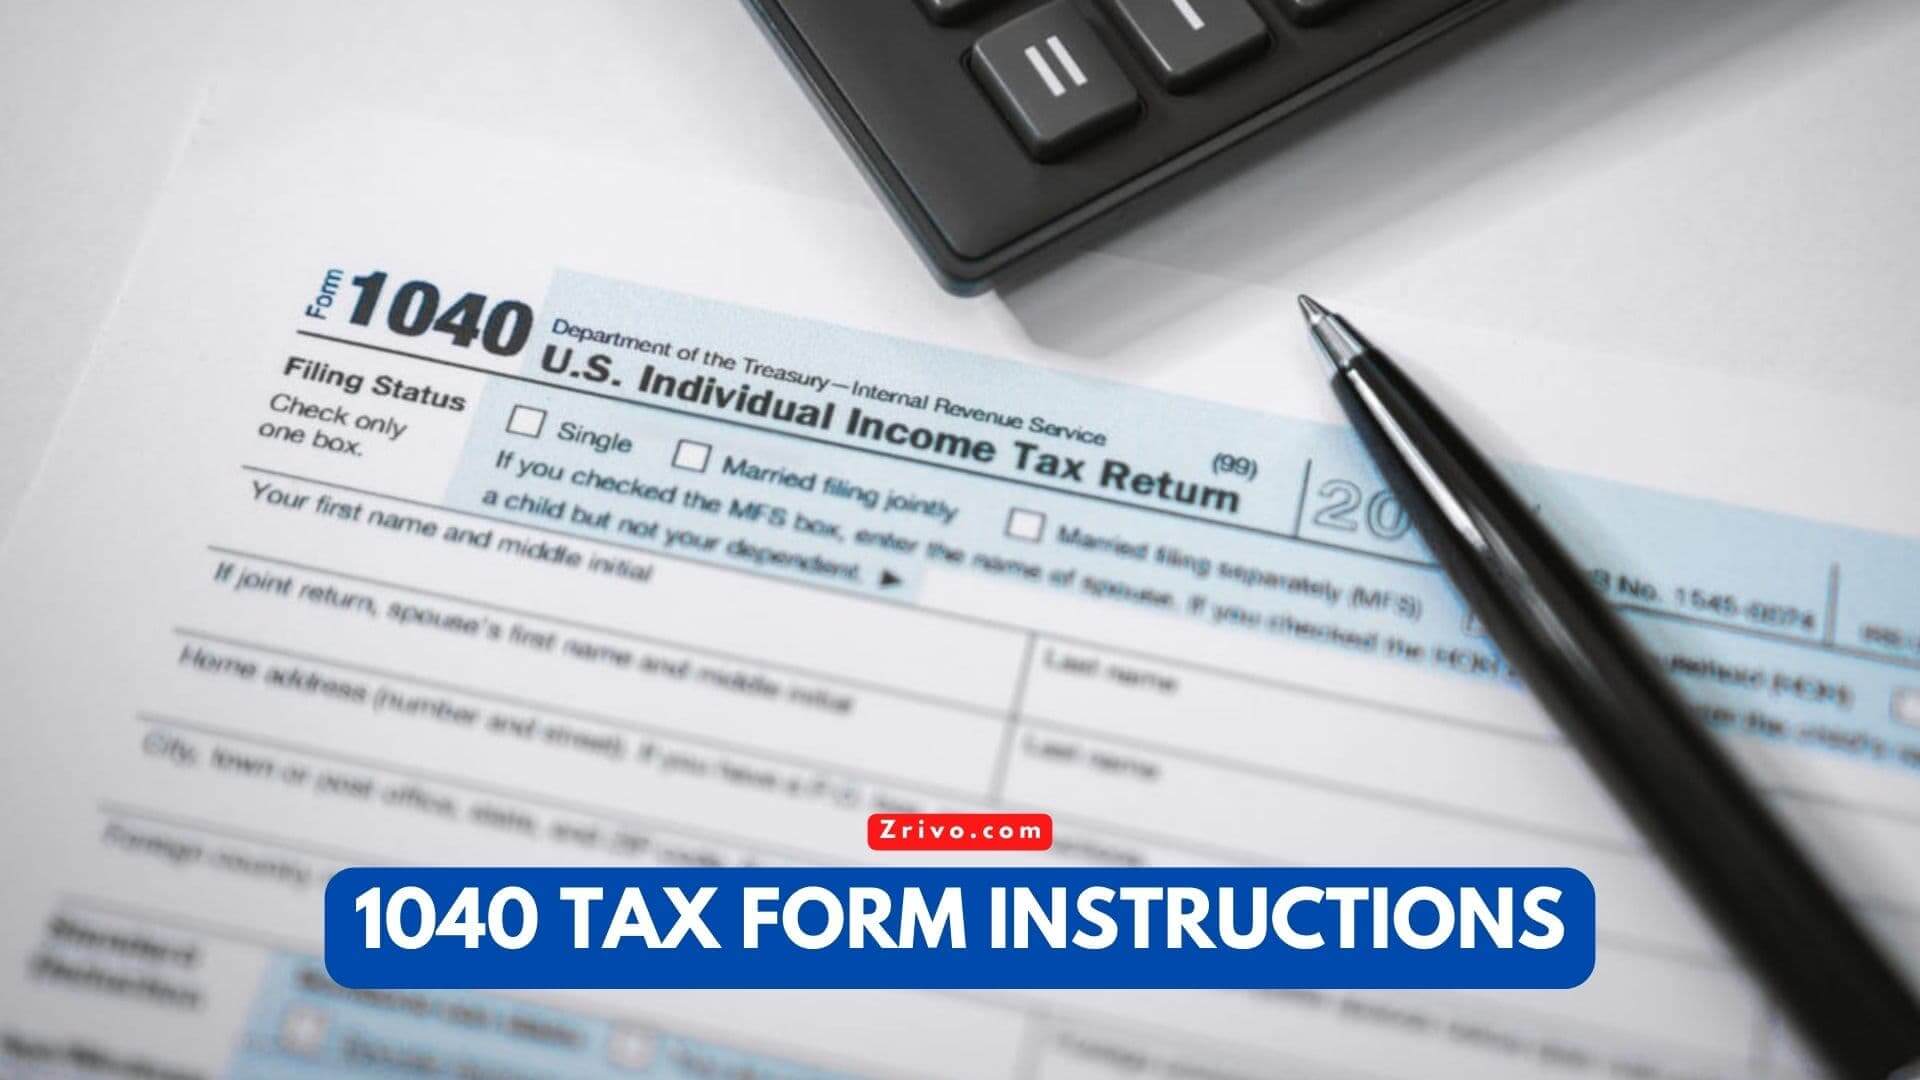 1040 Tax Form Instructions